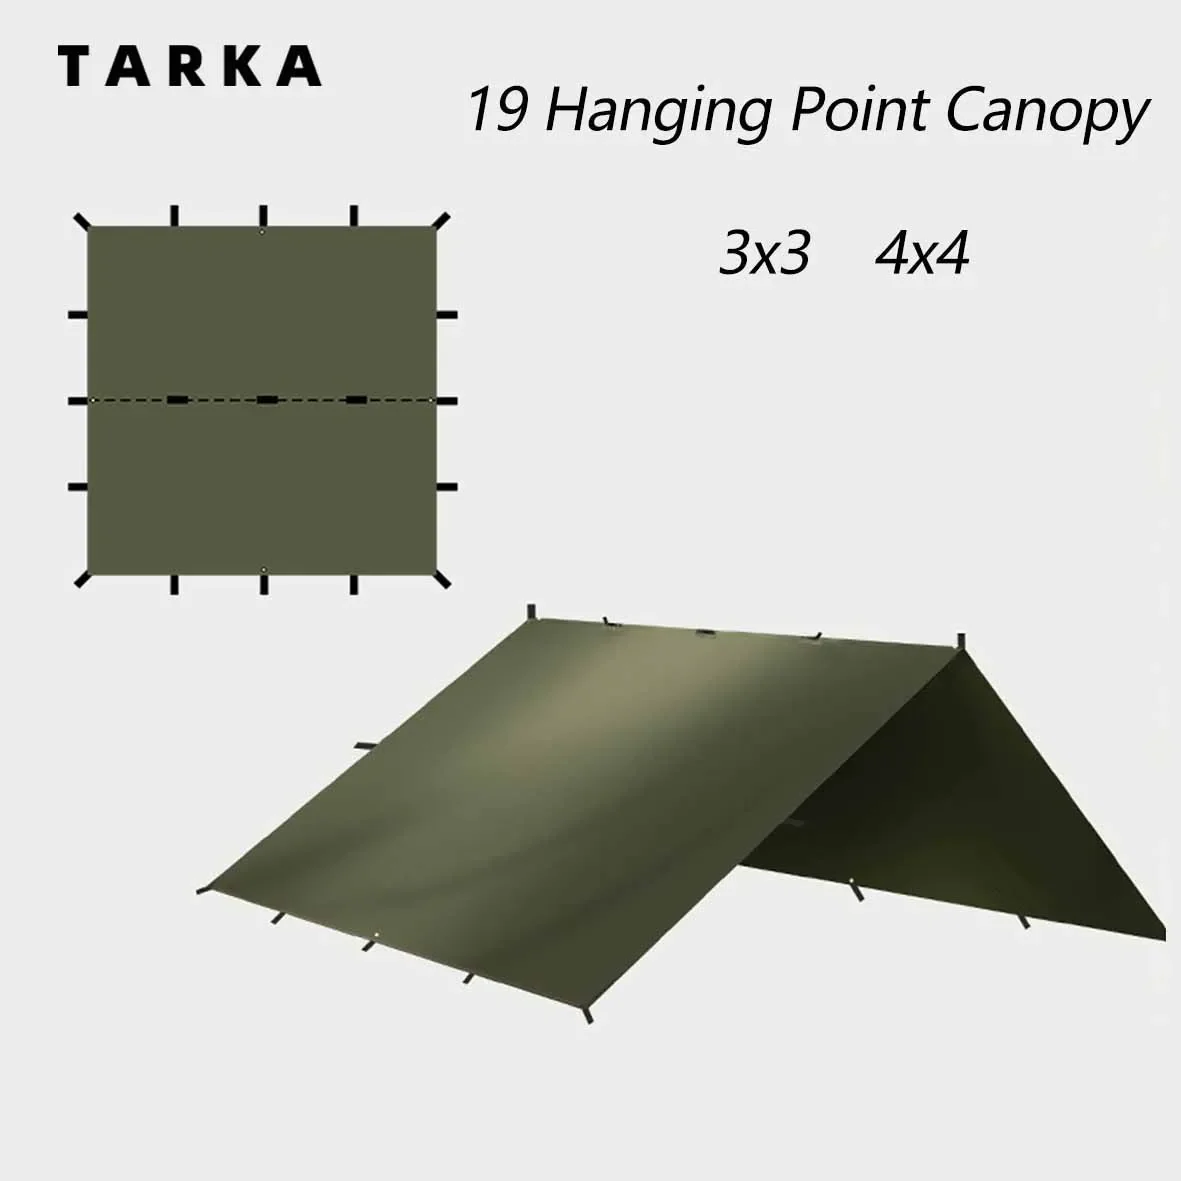 TARKA Outdoor Camping Tent Trap Survival Only Awning Waterproof Tarp Tent Shade Tourist Sun Shelter Shade Canopy 4x4m/4x3m/3x3m